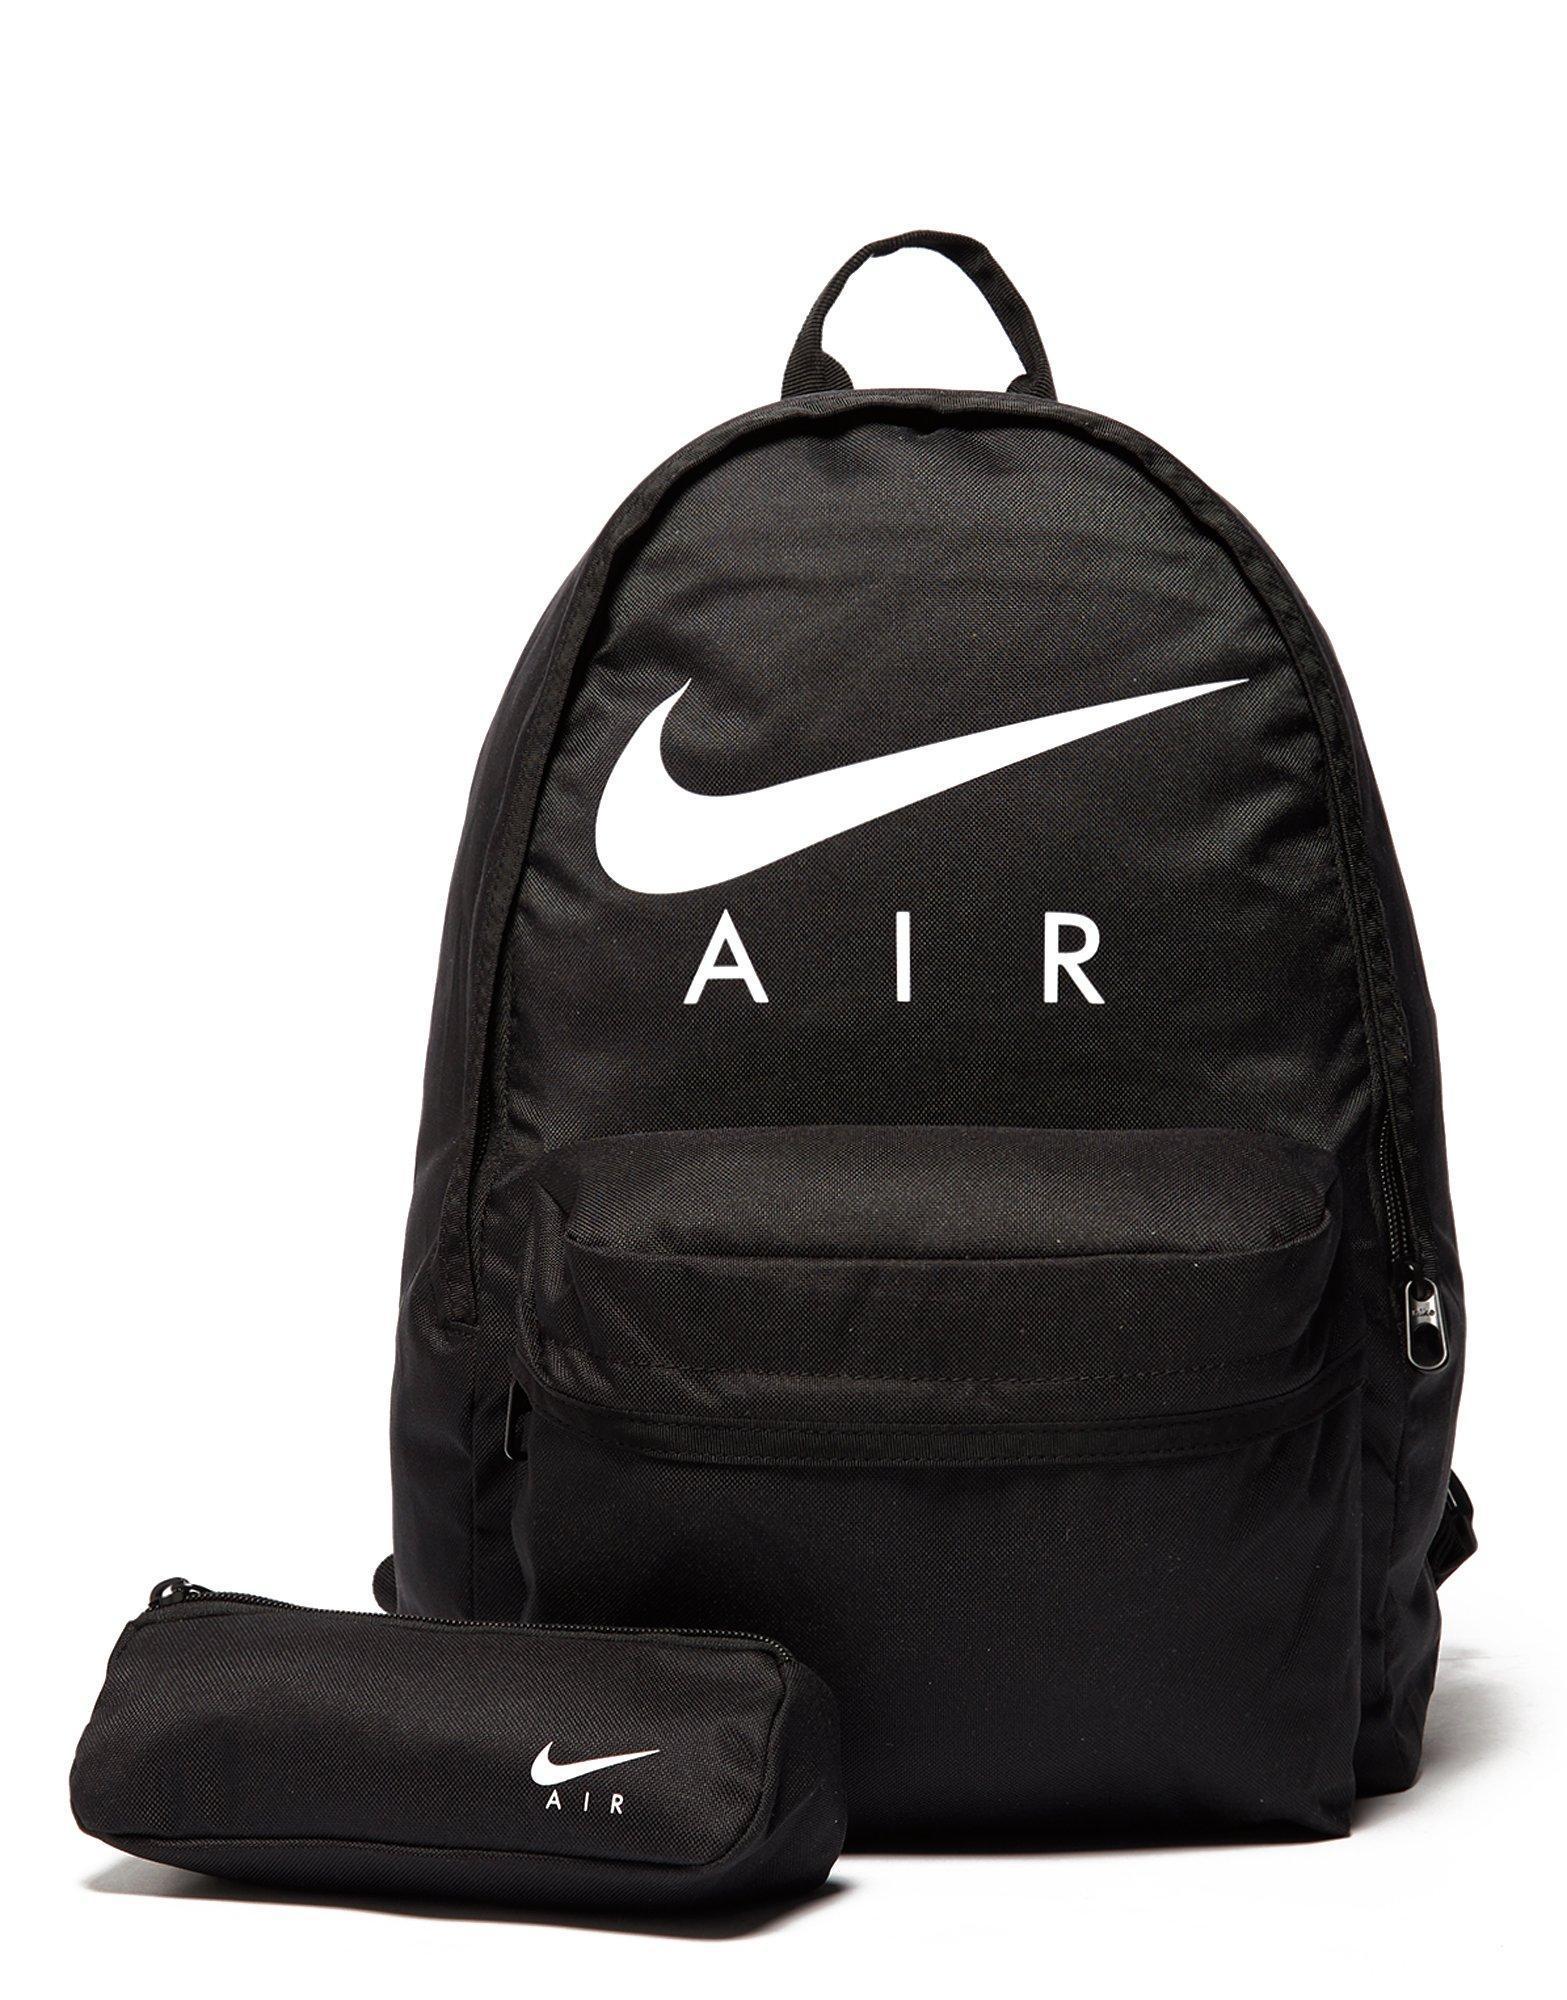 Nike Black And White Book Bags Confederated Tribes Of The